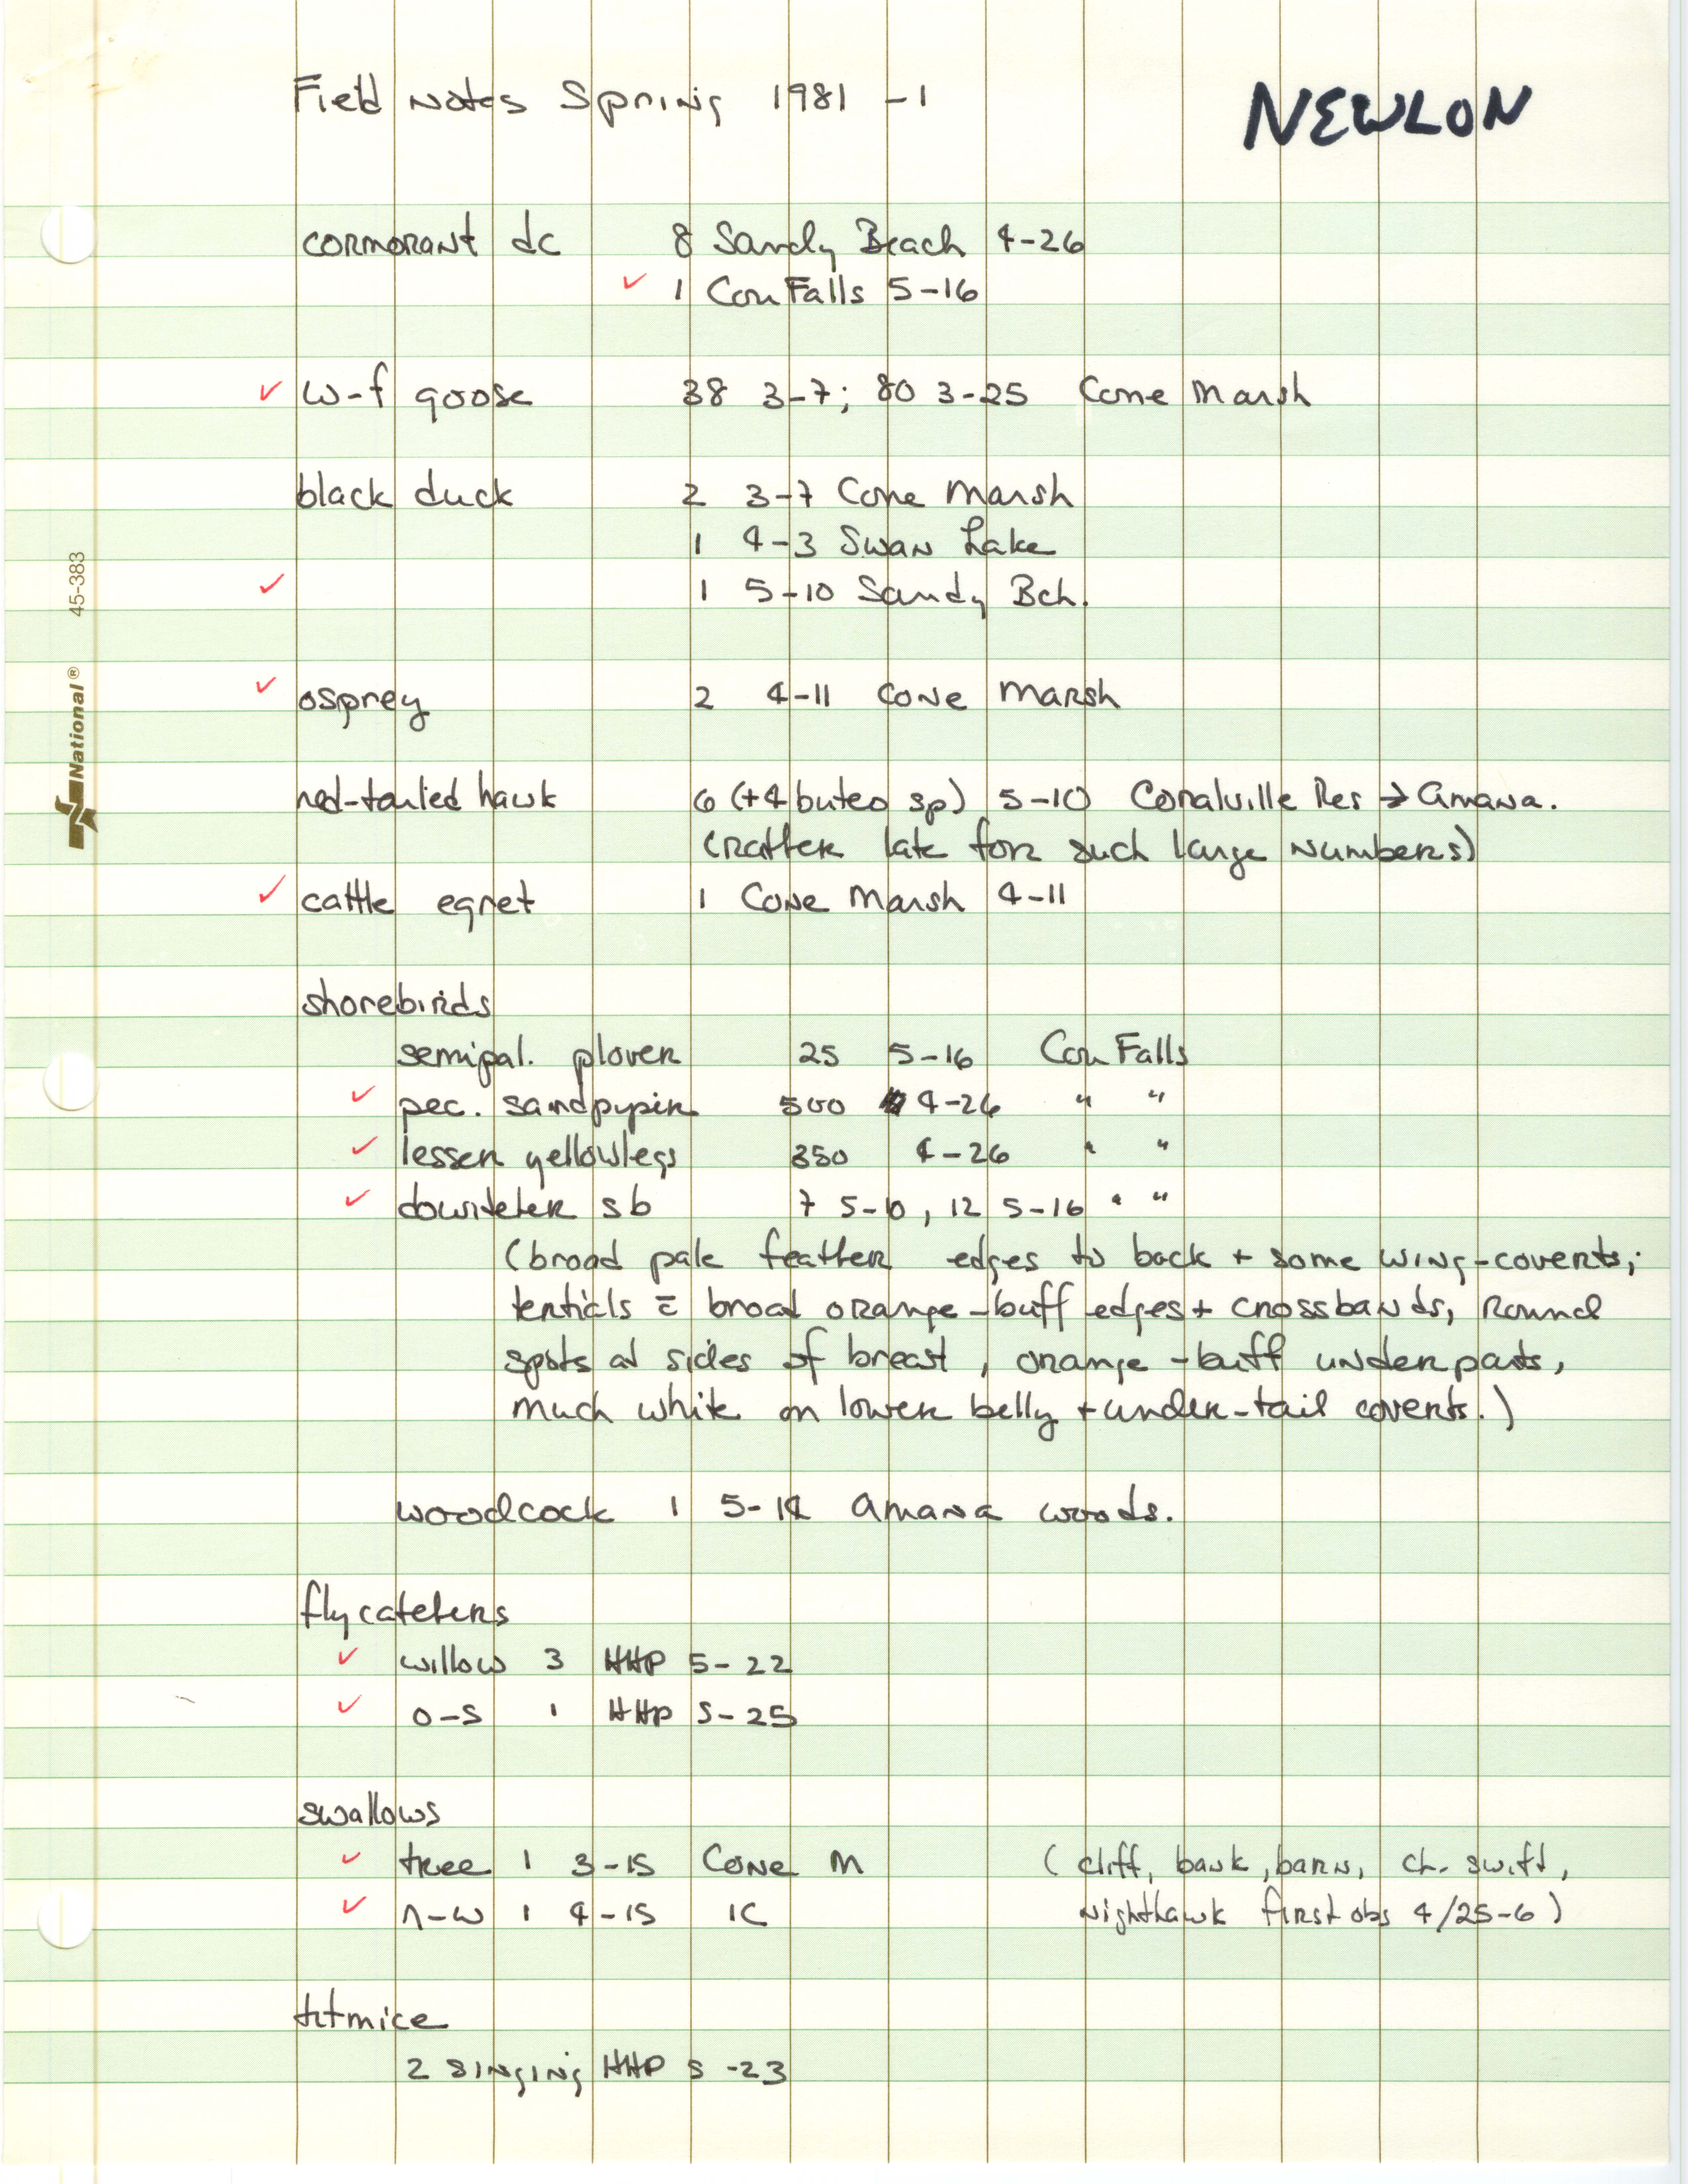 Field notes spring 1981